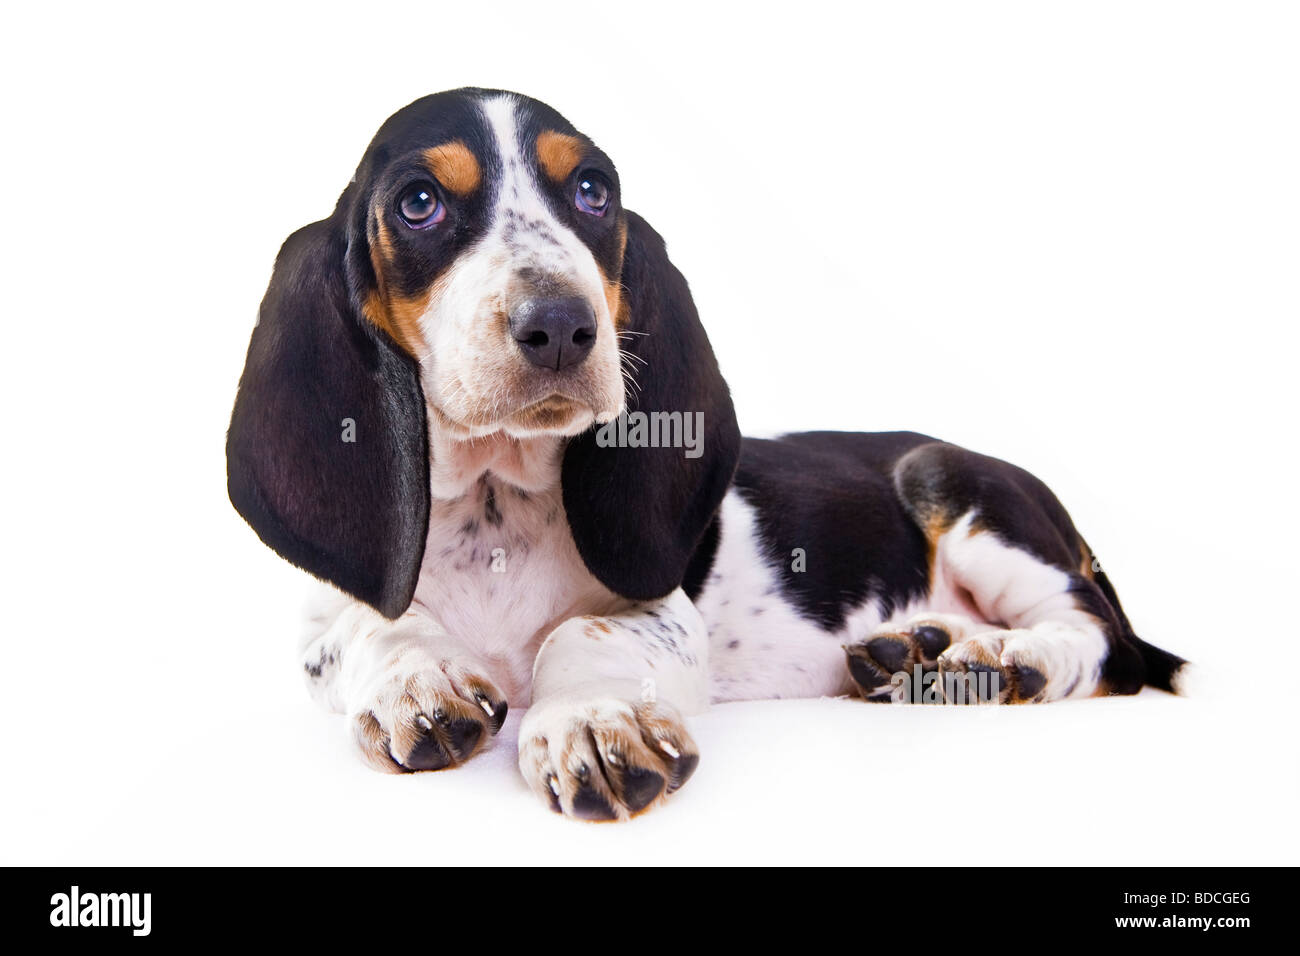 Basset Hound Puppy High Resolution Stock Photography and Images - Alamy